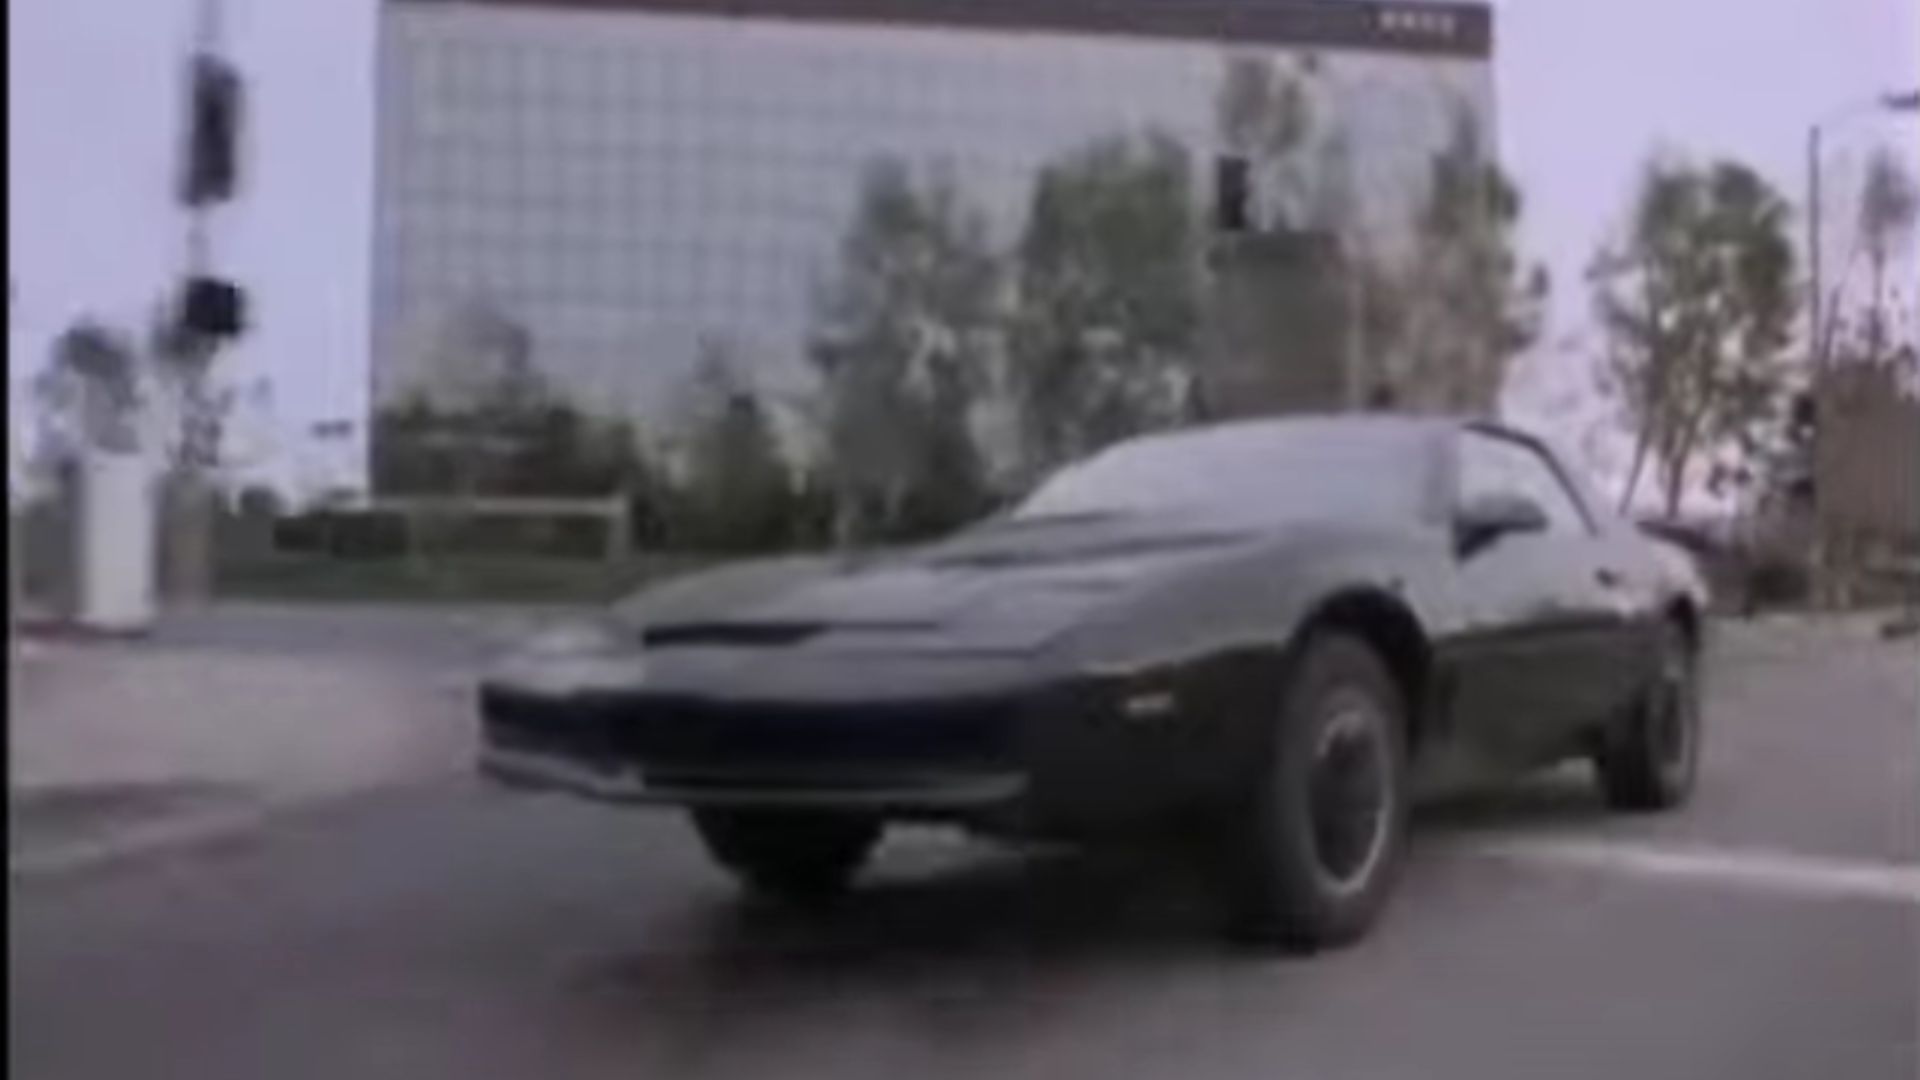 news, muscle, american, highlights, newsletter, handpicked, sports, client, classic, modern classic, europe, features, luxury, trucks, celebrity, off-road, german, canadian, watch this knight rider documentary